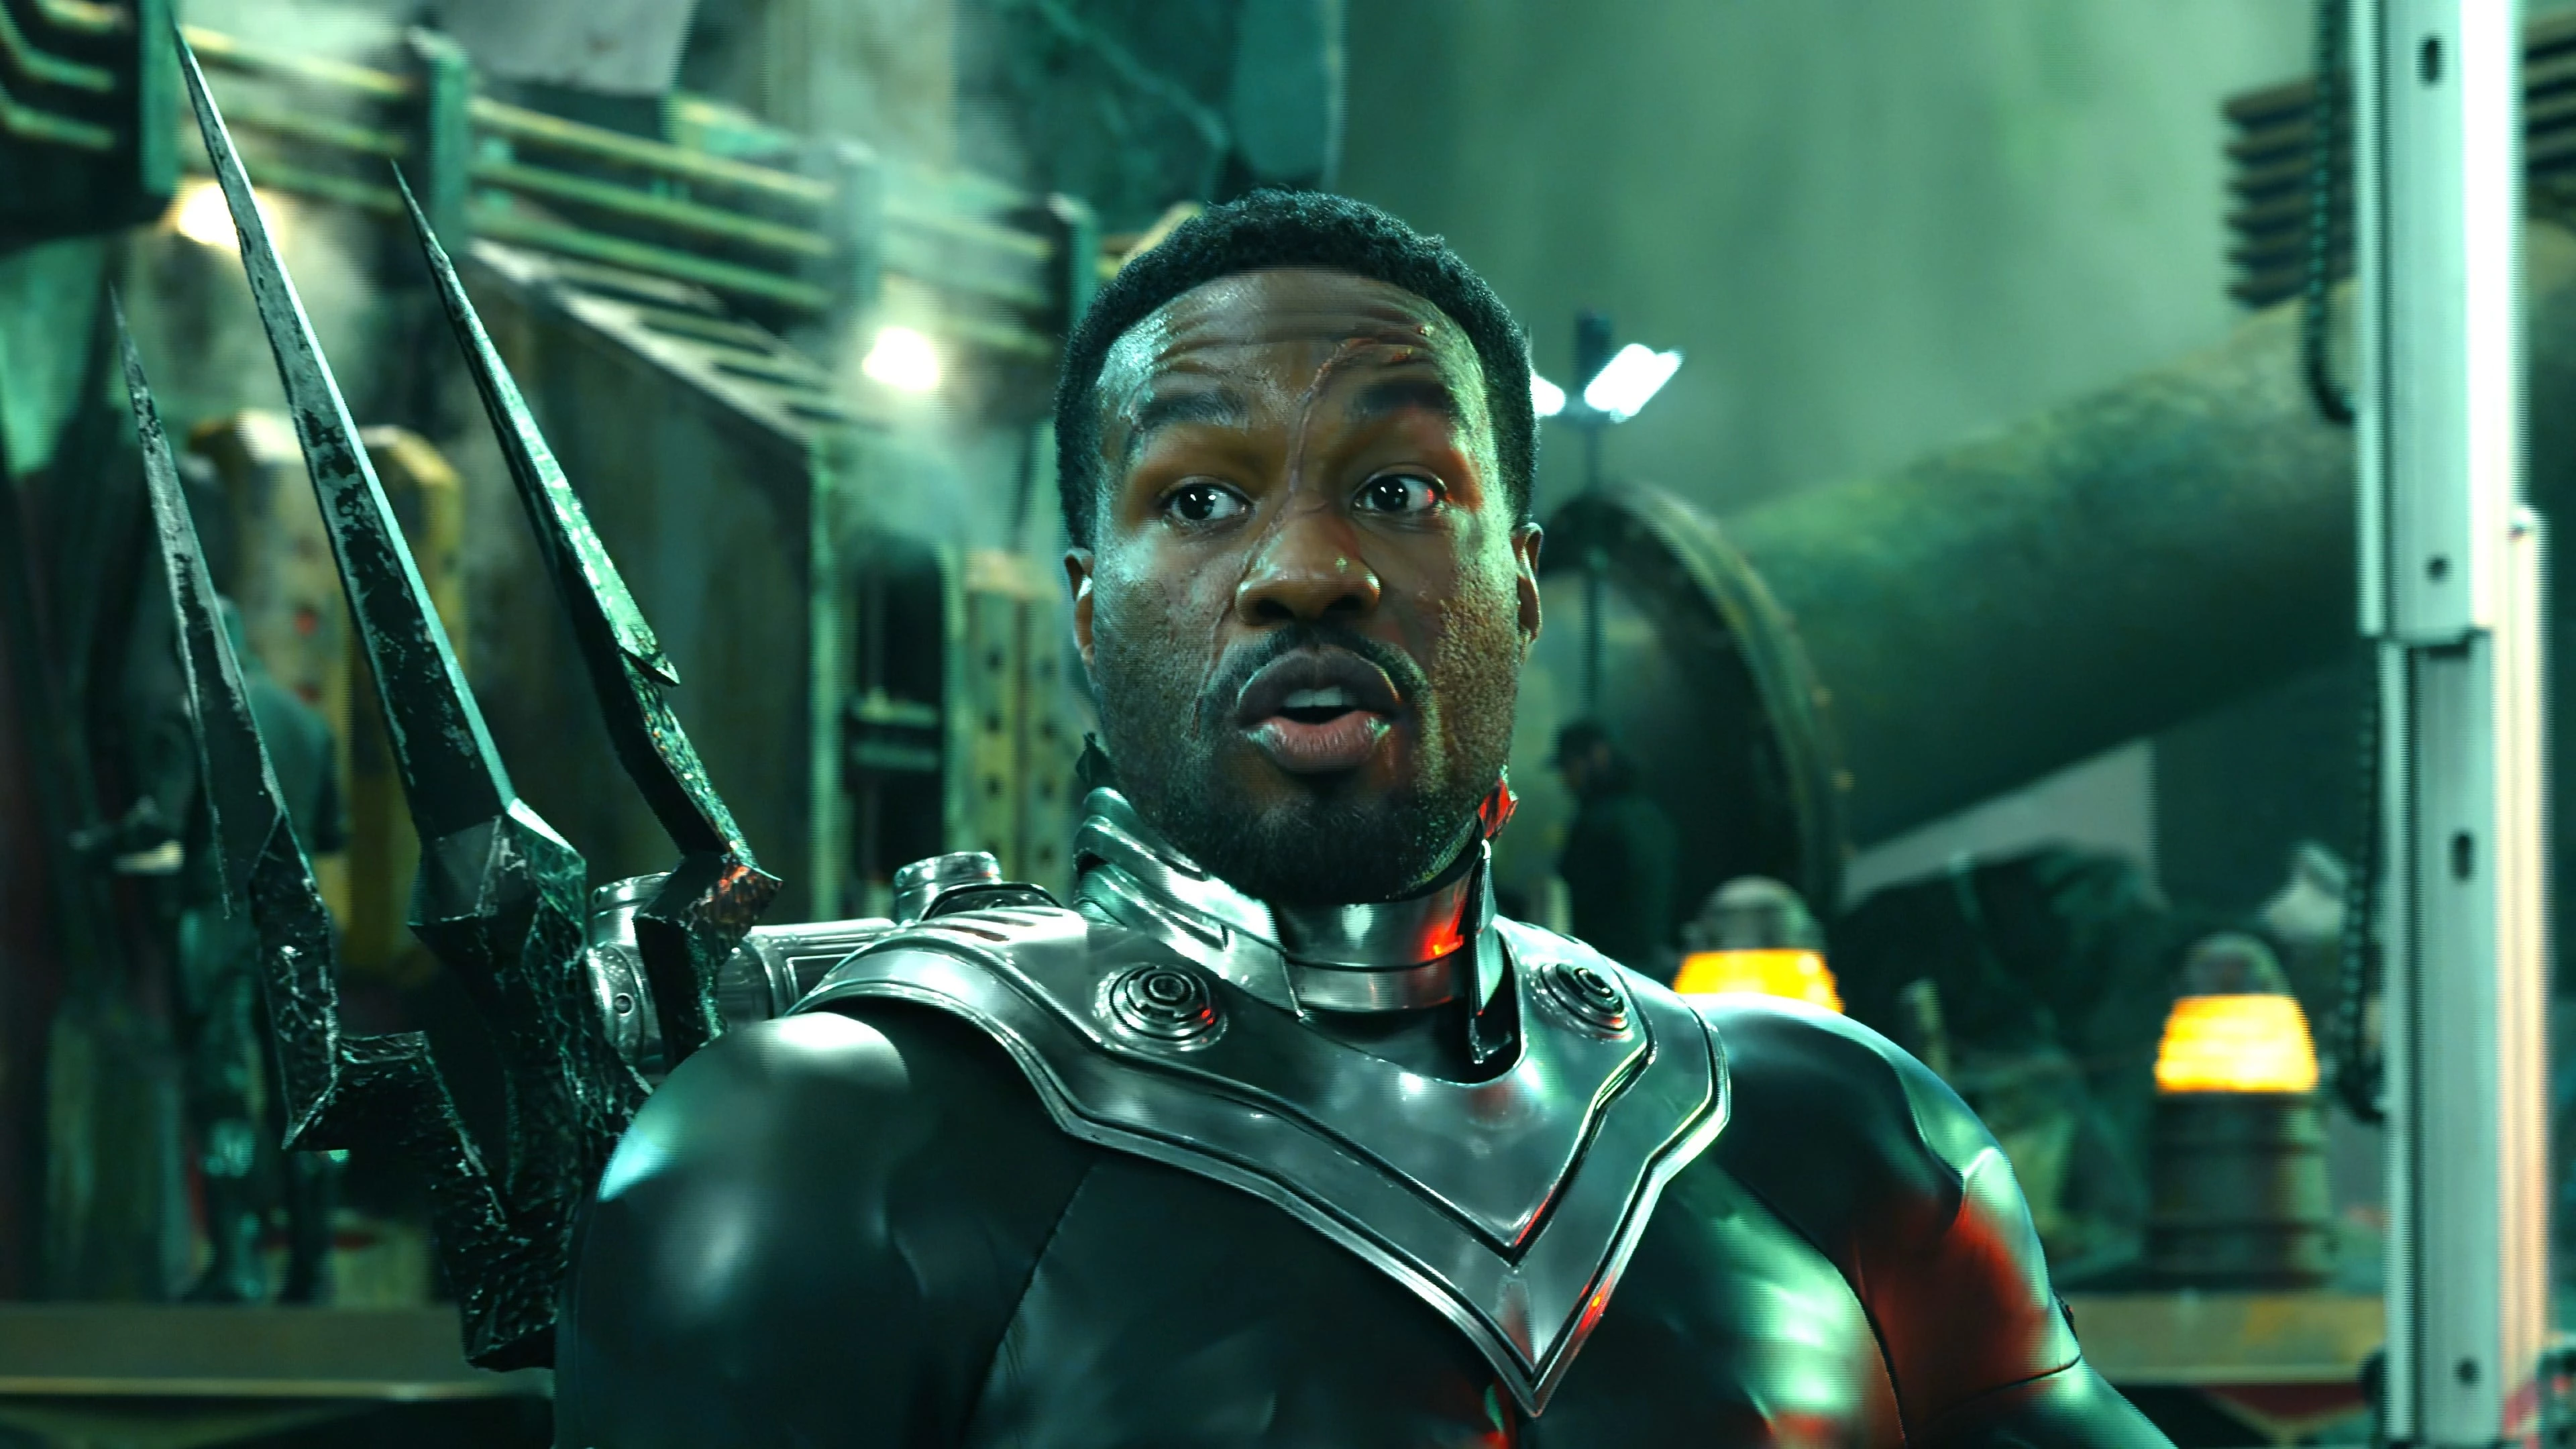 Black Manta Is Played By Yahya Abdul-Mateen II, A 37-Year-Old Actor. He’s Best Known For His Role In The Matrix: Resurrection